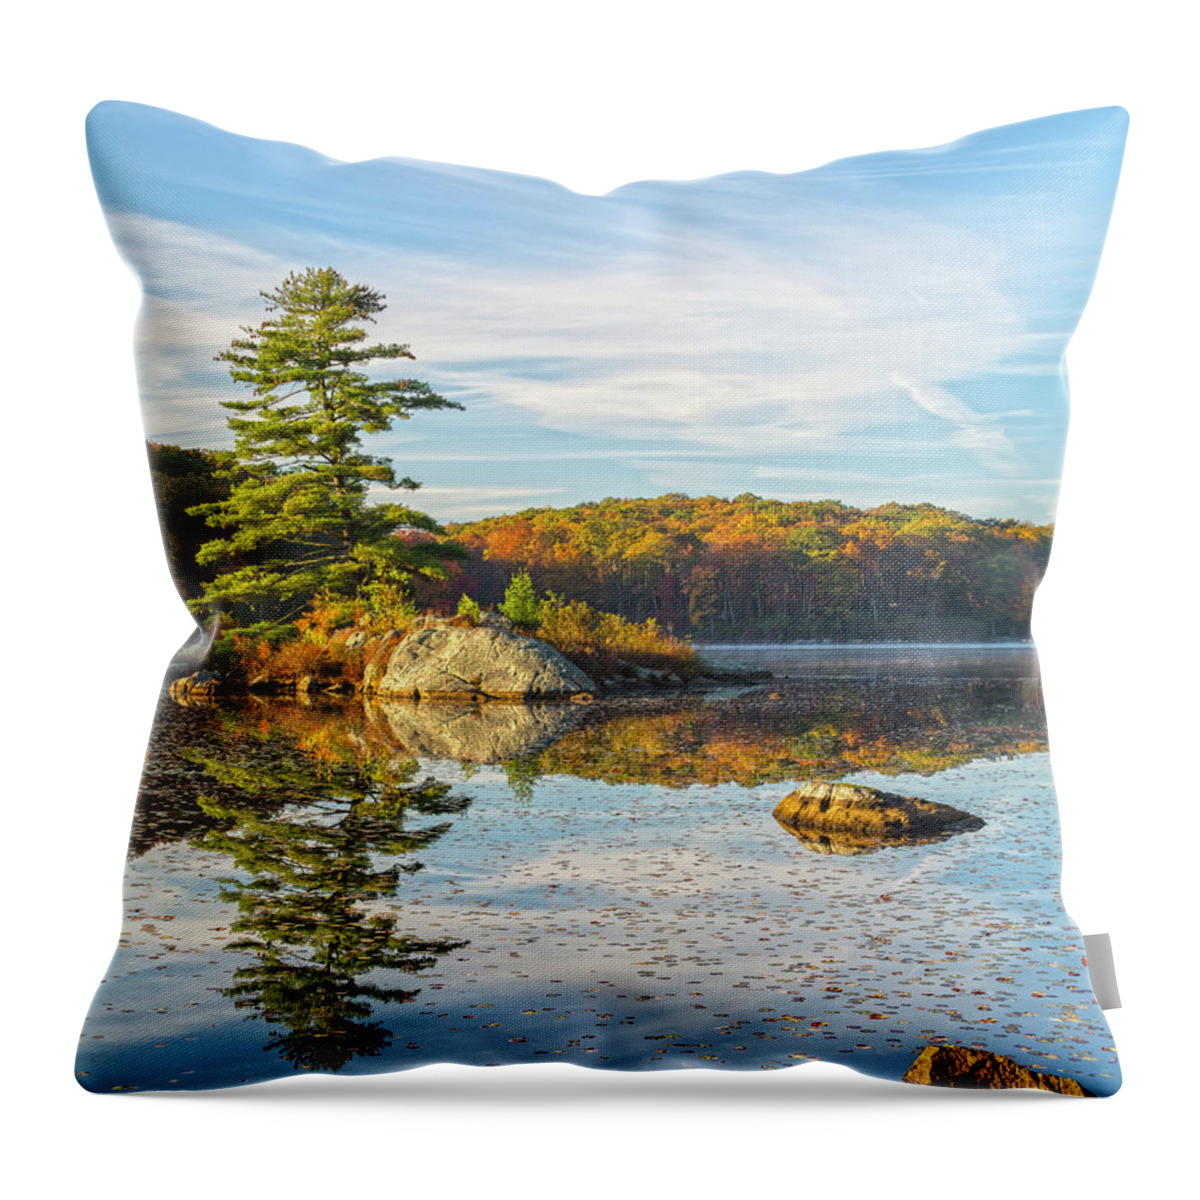 Dawn Throw Pillow featuring the photograph Zen Morning At Little Long Pond Vertical Cropped by Angelo Marcialis